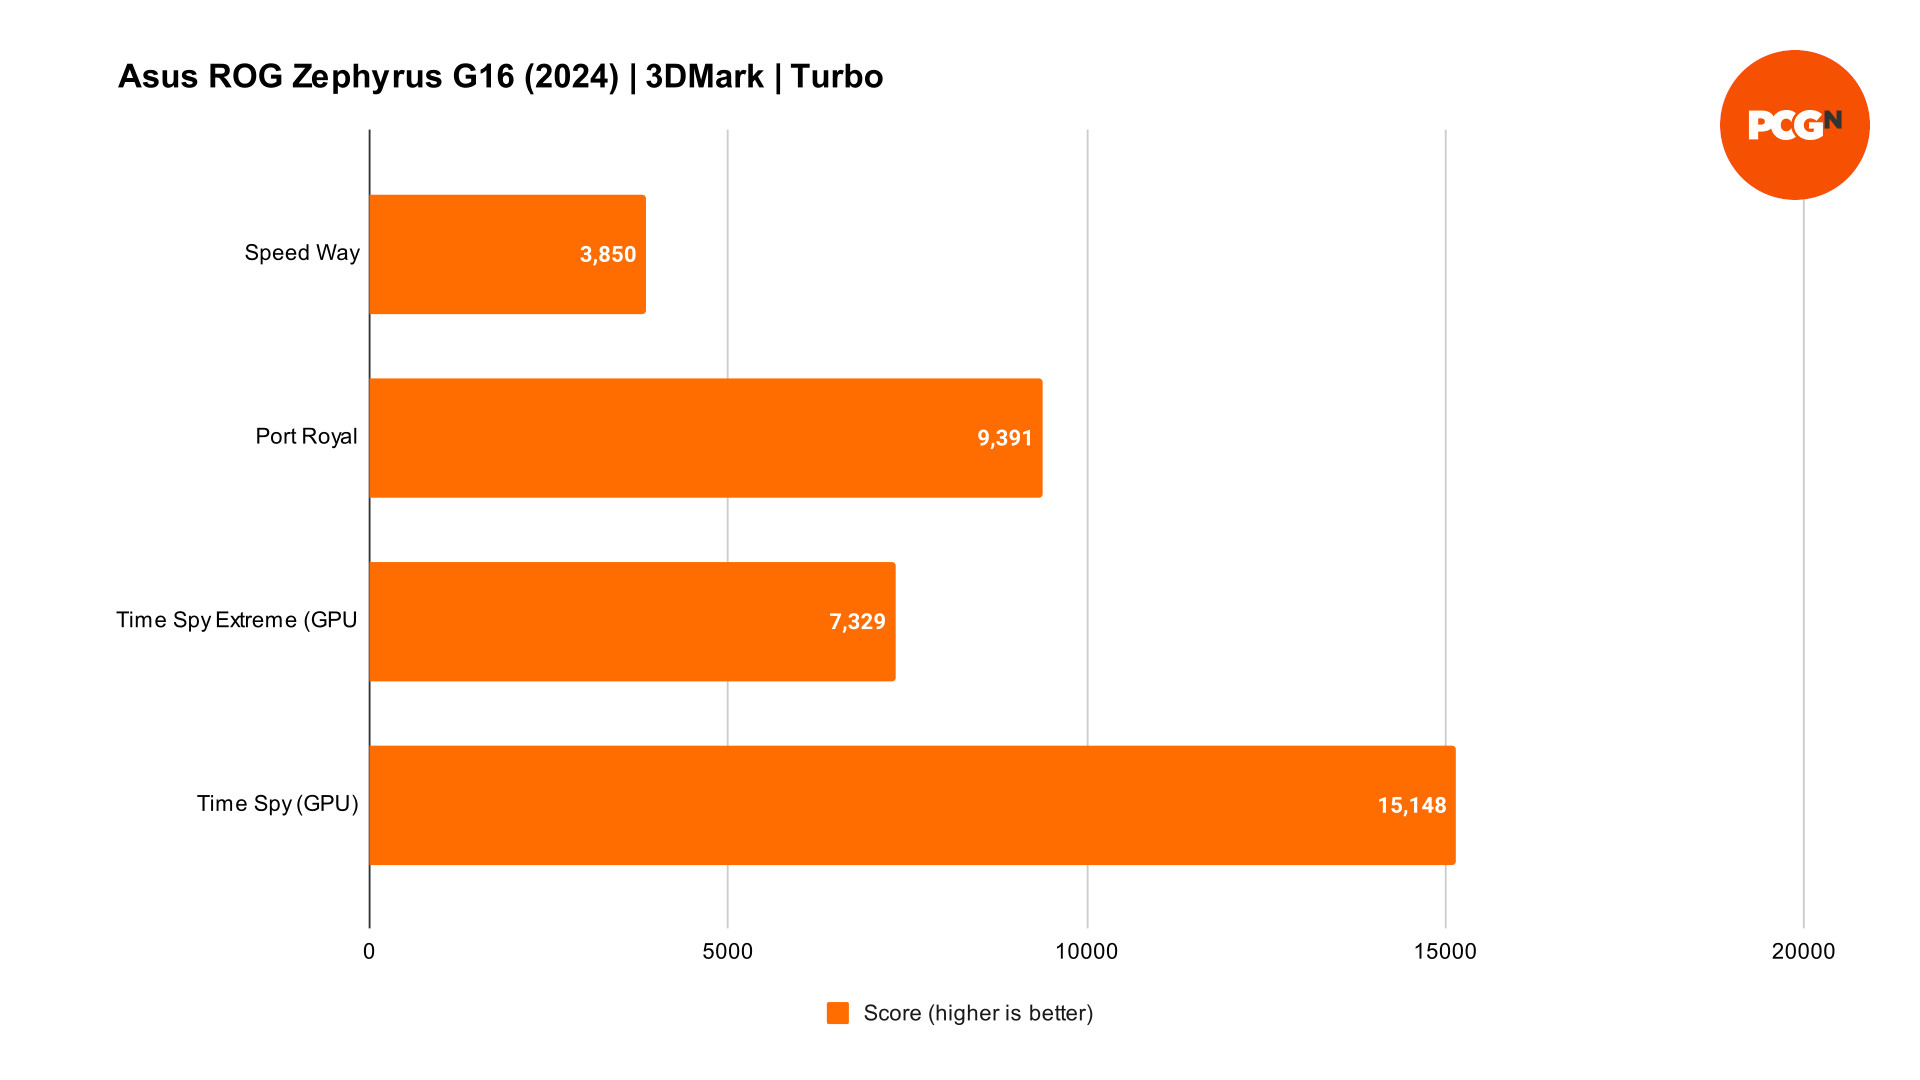 Asus ROG Zephyrus G16 (2024) review: 3DMark results graph